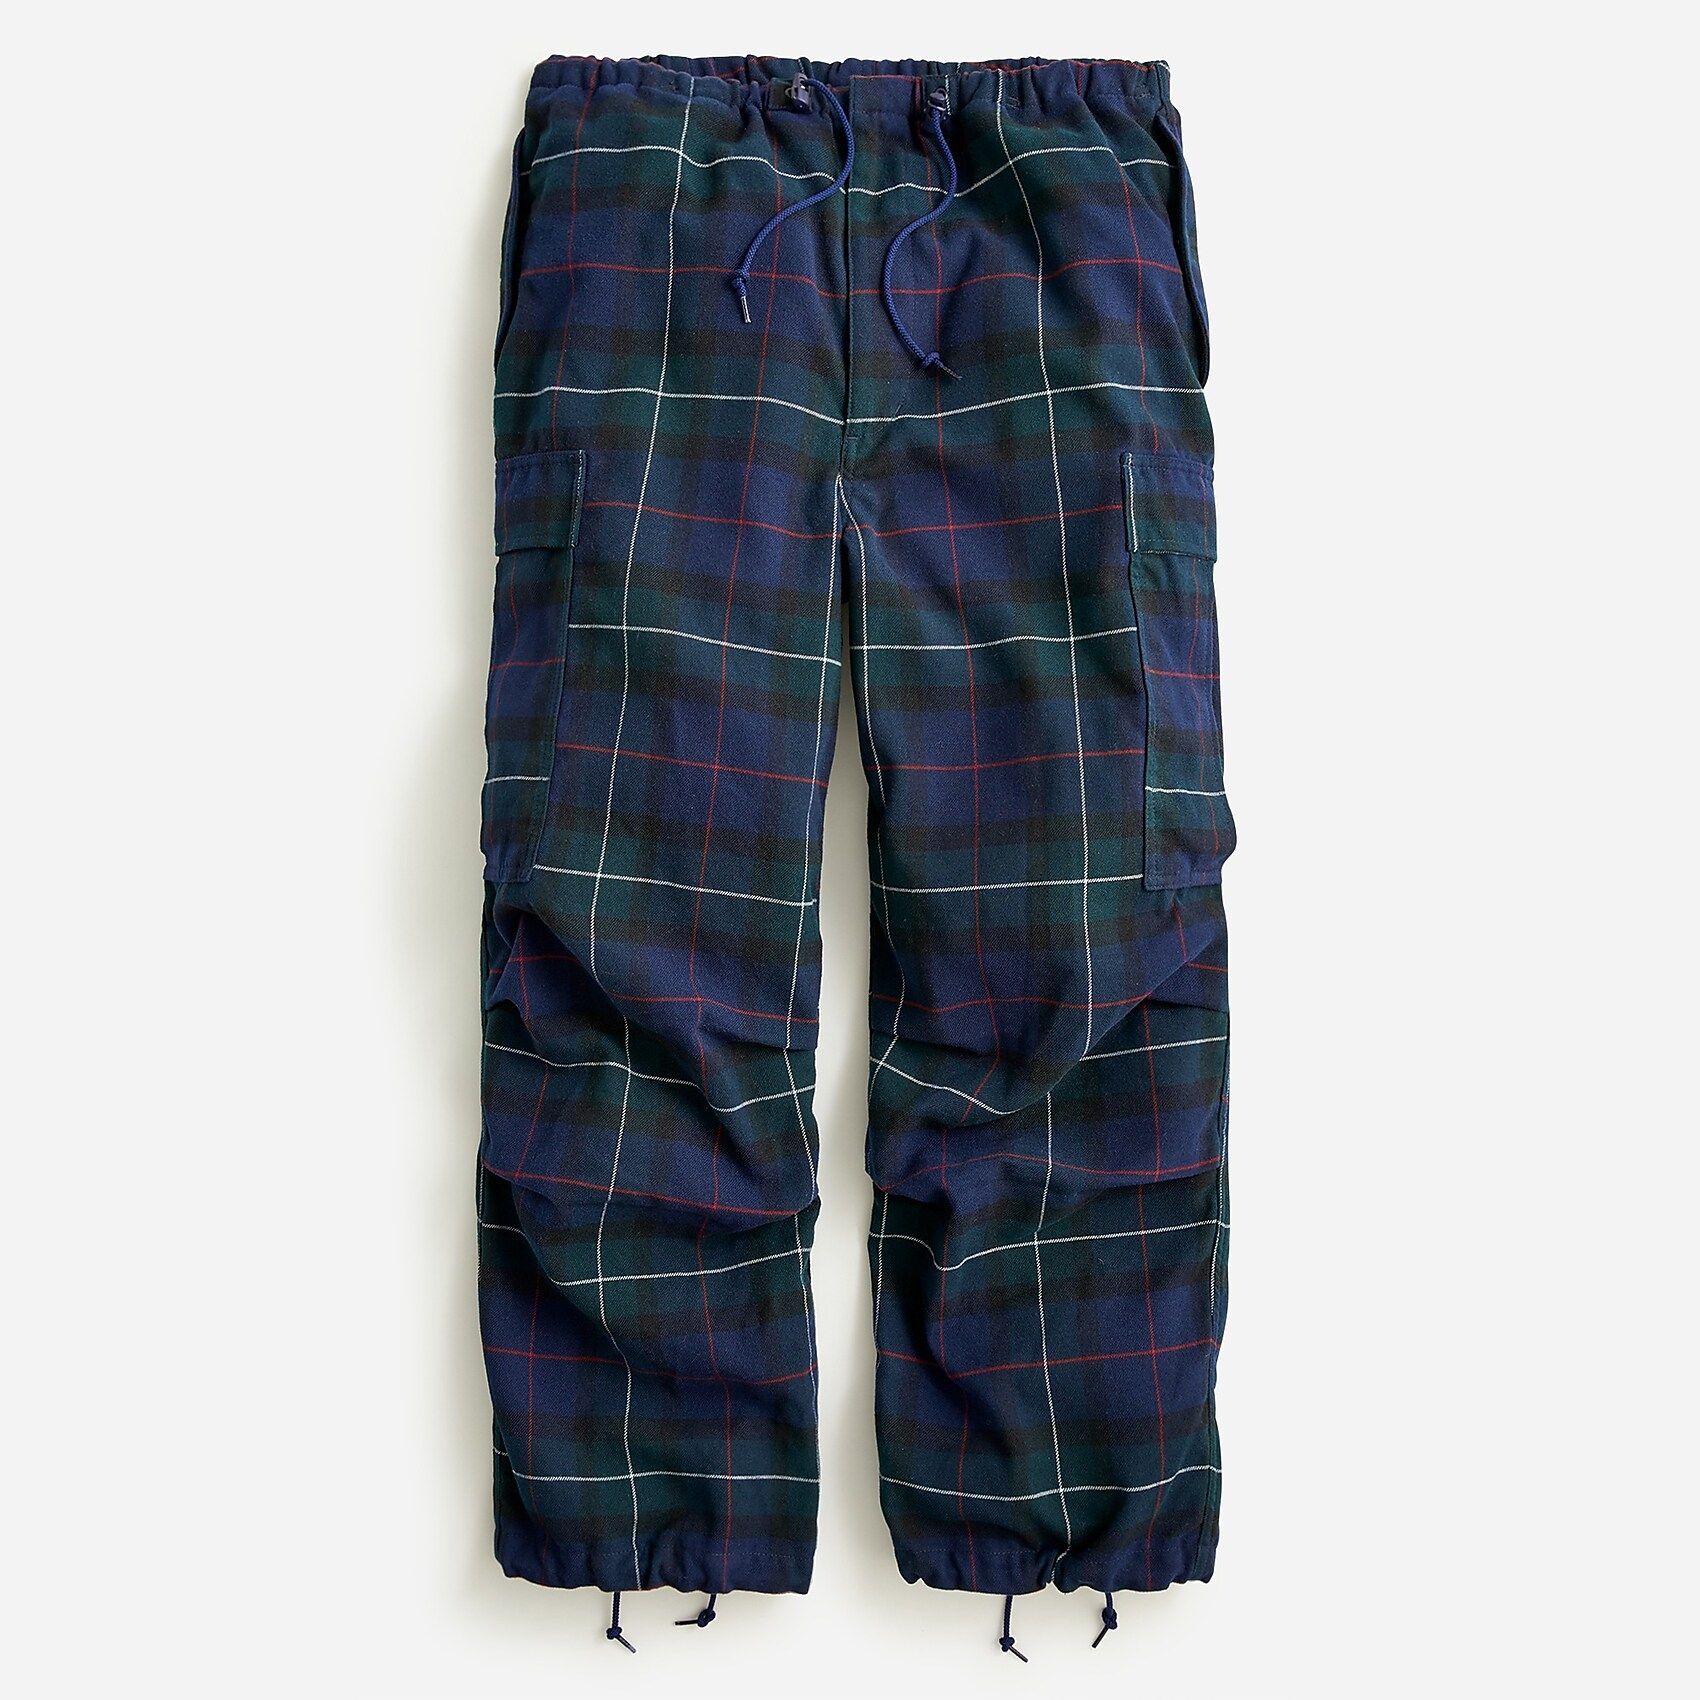 Military Six-Pocket Pant in Plaid